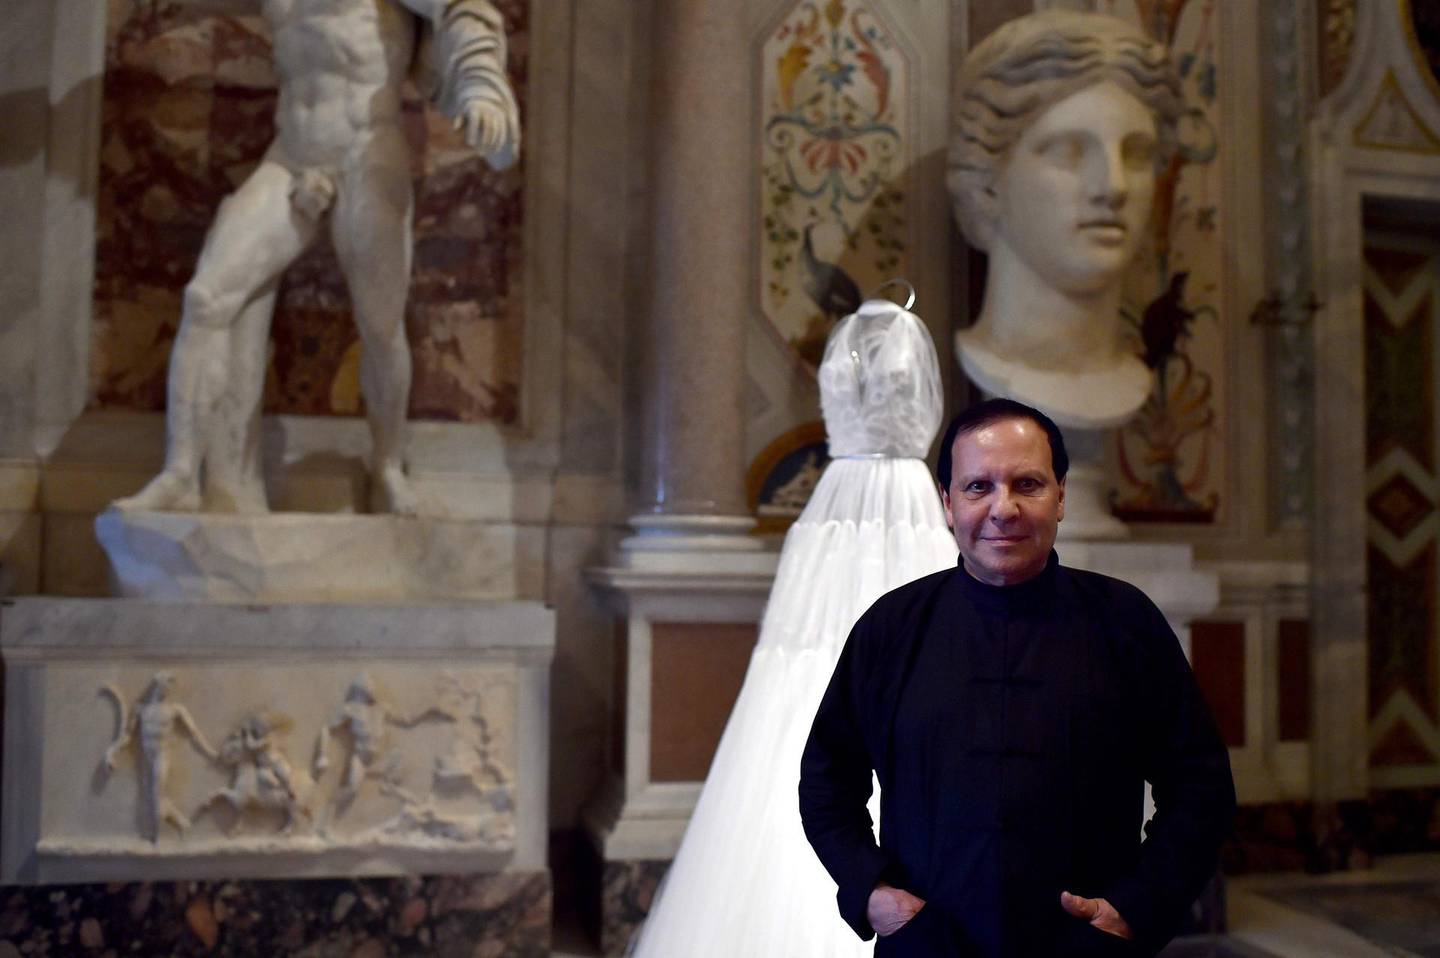 (FILES) This file photo taken on July 10, 2015 shows Tunisian-born, Paris-based couturier Azzedine Alaia posing during the press preview of the exhibition " Azzedine Alaia's soft sculpture" at the Galleria Borghese in Rome. 
Alaia died at age 77 according to the French Haute Couture Federation, AFP reports on November 18, 2017. / AFP PHOTO / Gabriel BOUYS